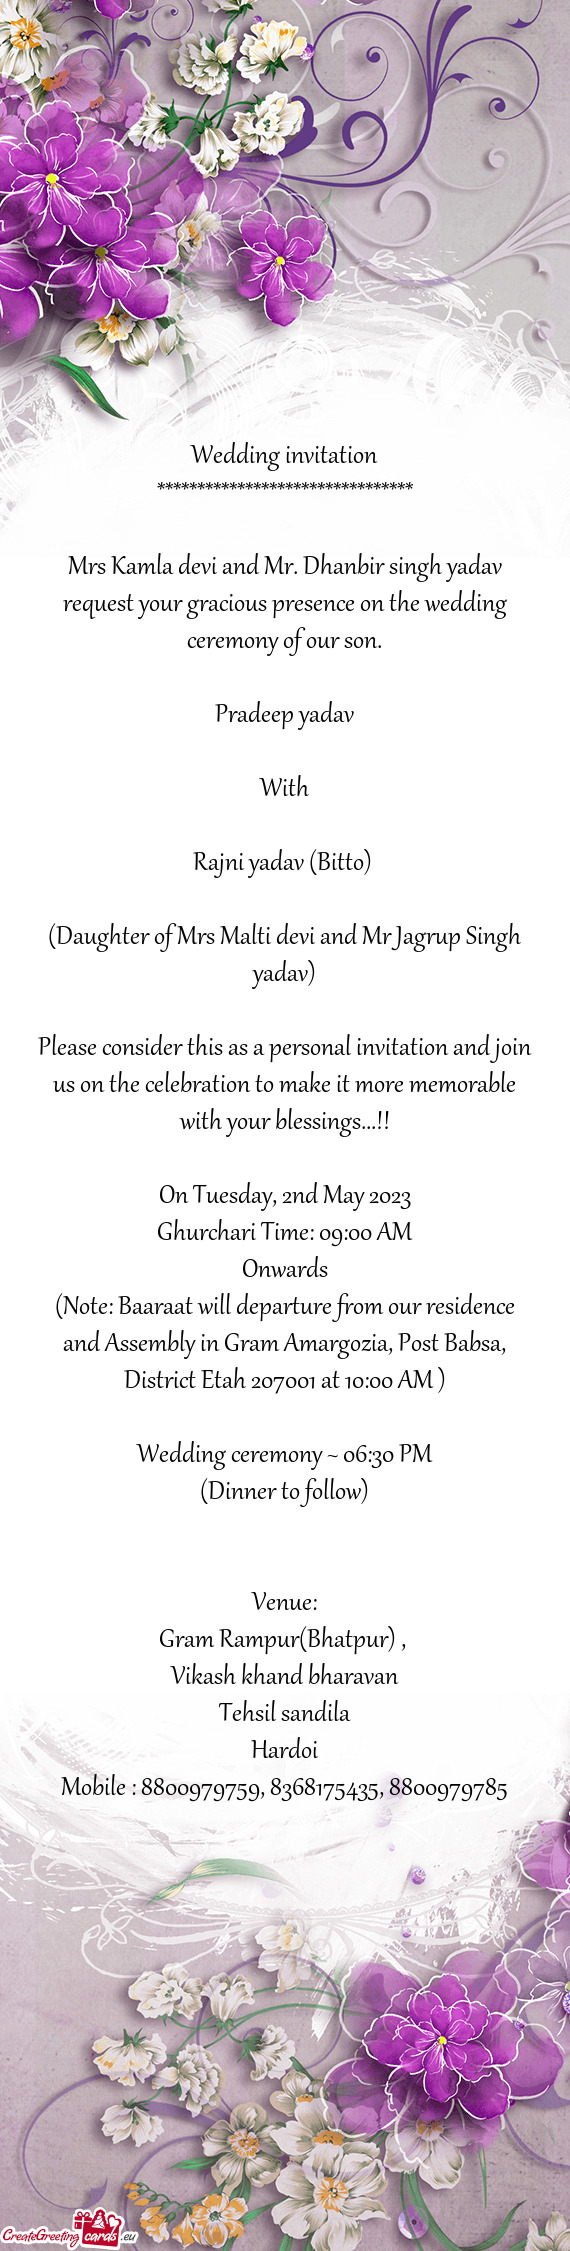 Mrs Kamla devi and Mr. Dhanbir singh yadav request your gracious presence on the wedding ceremony of